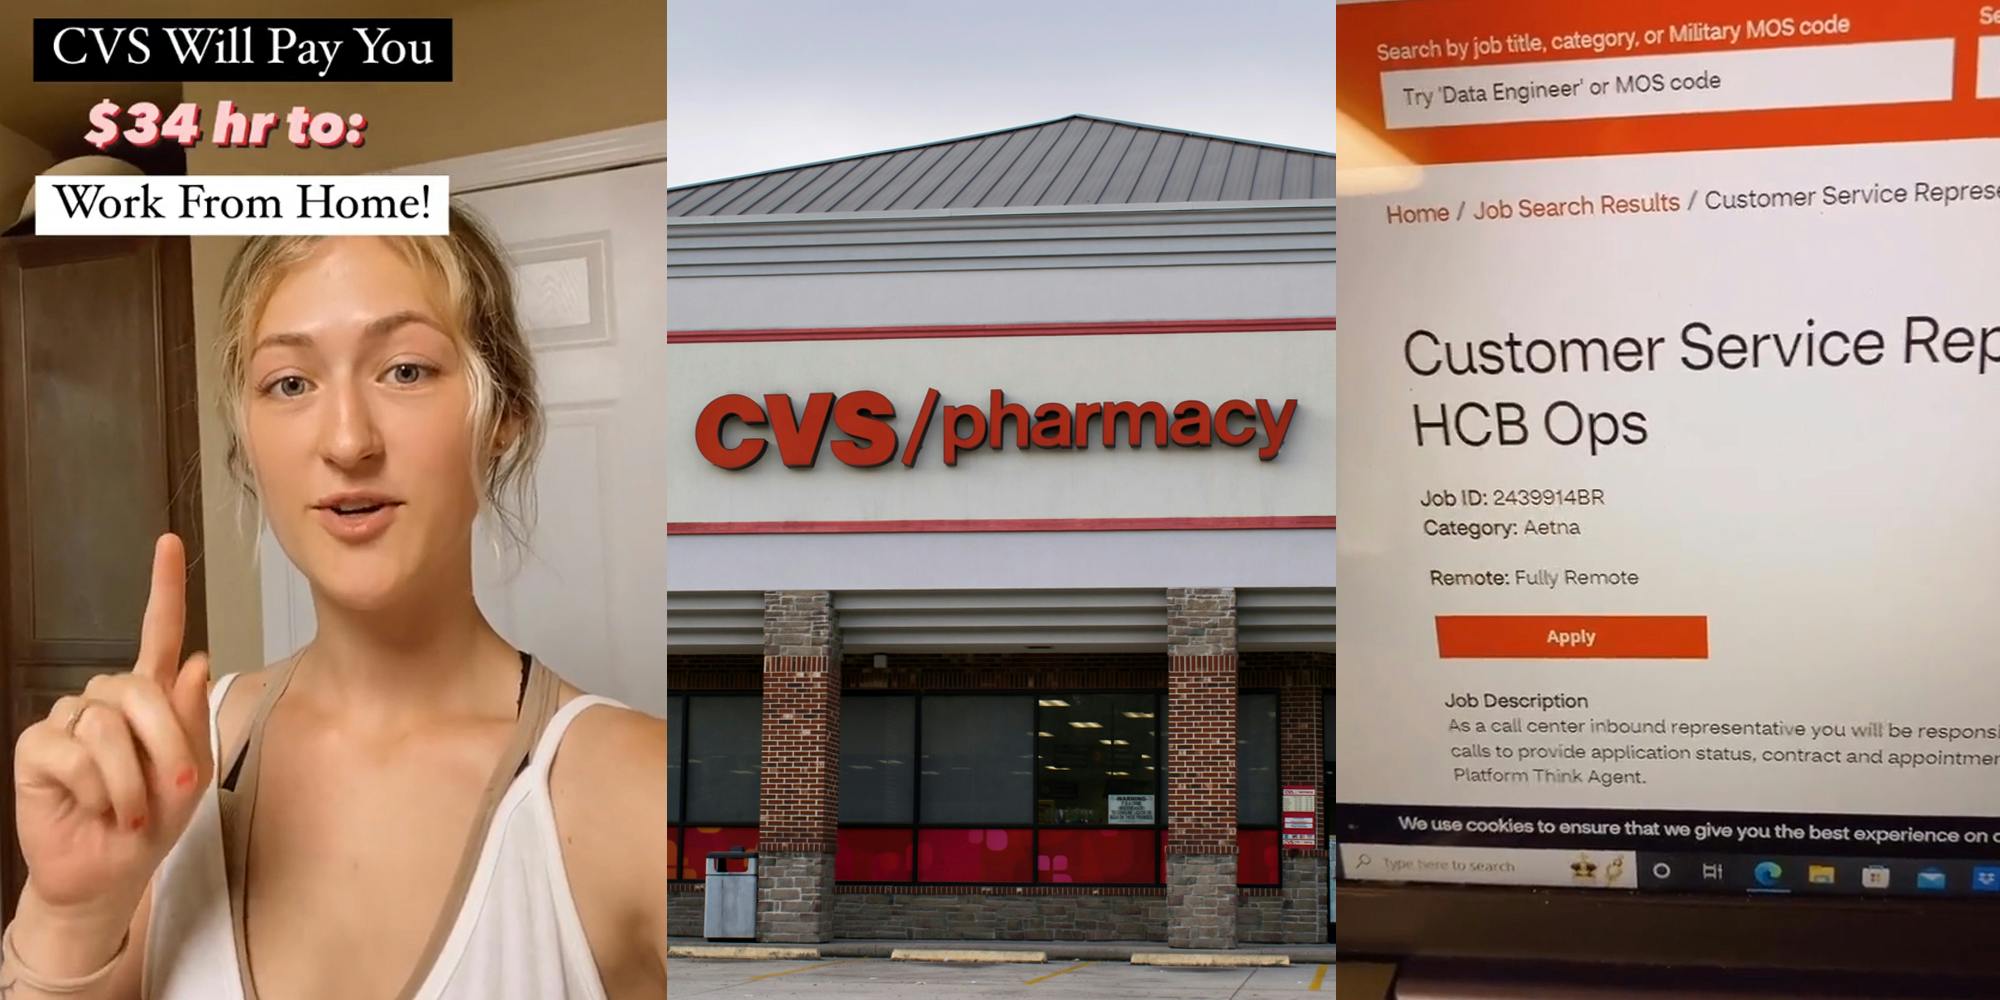 worker speaking with caption "CVS Will Pay You $34 hr to: Work From Home!" (l) CVS/Pharmacy sign on building (c) CVS website remote job listings on computer screen (r)